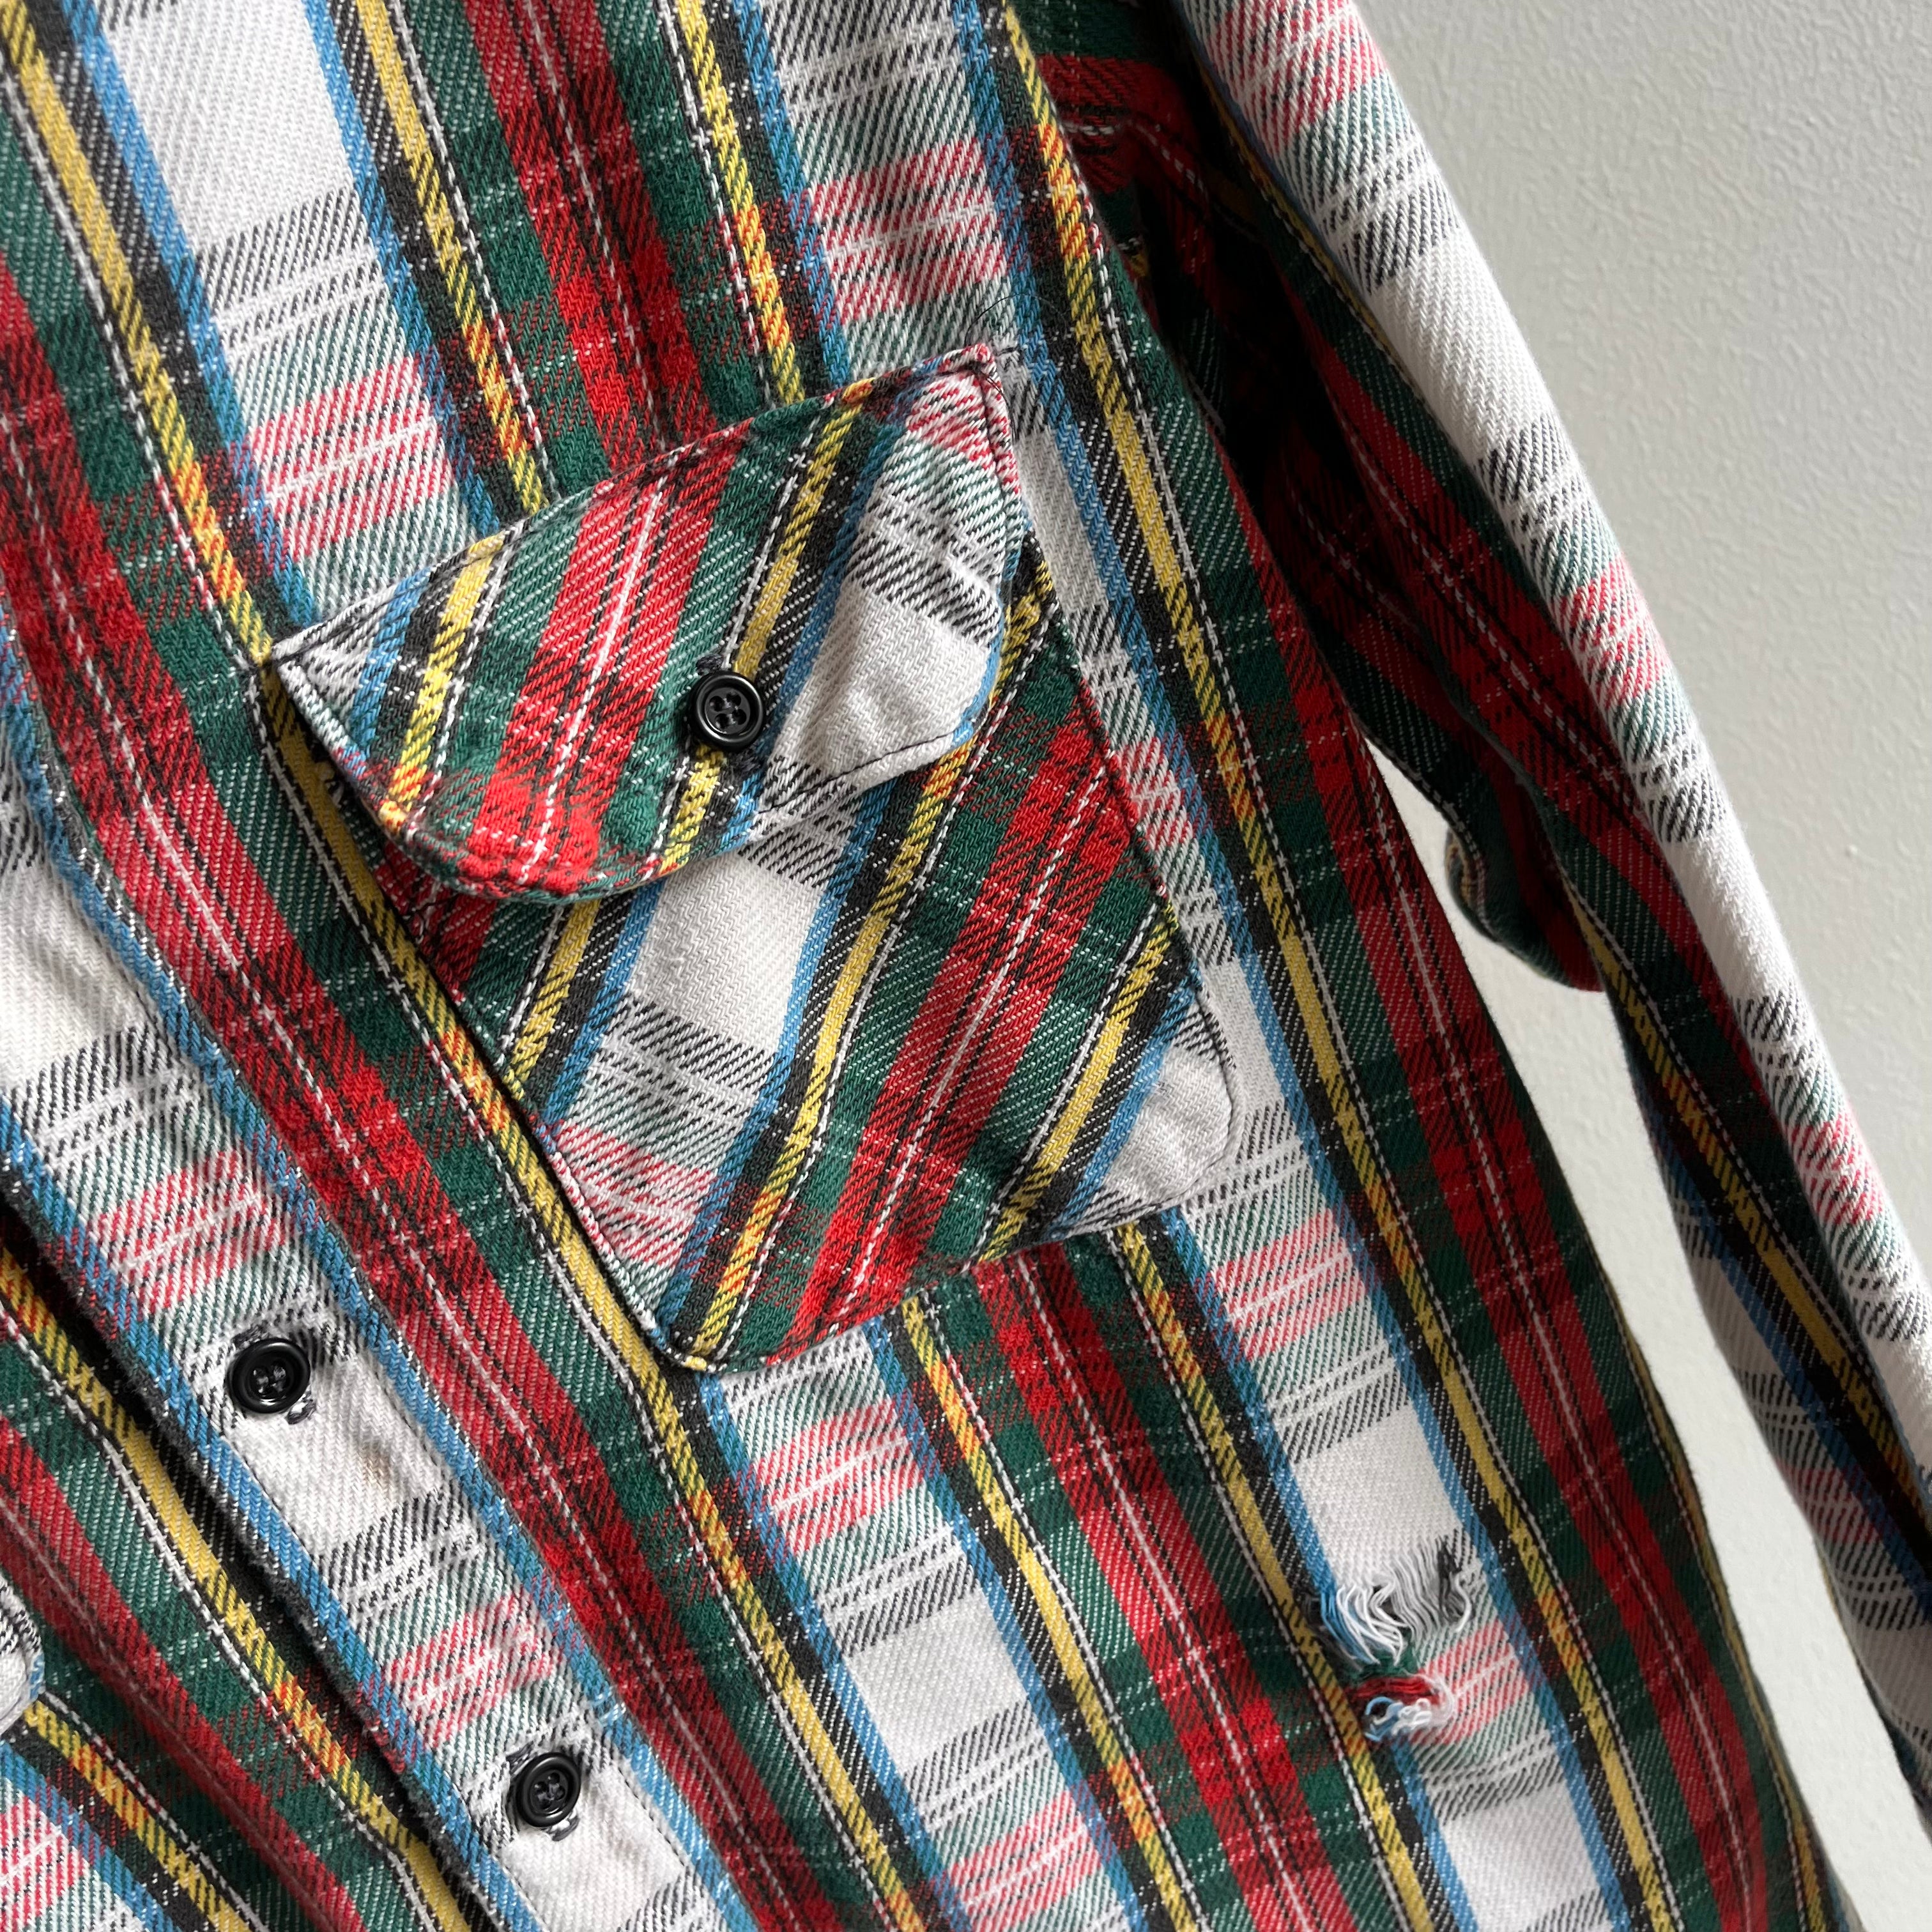 1980s Classic Five Brothers Red, Yellow and Blue Cotton Flannel